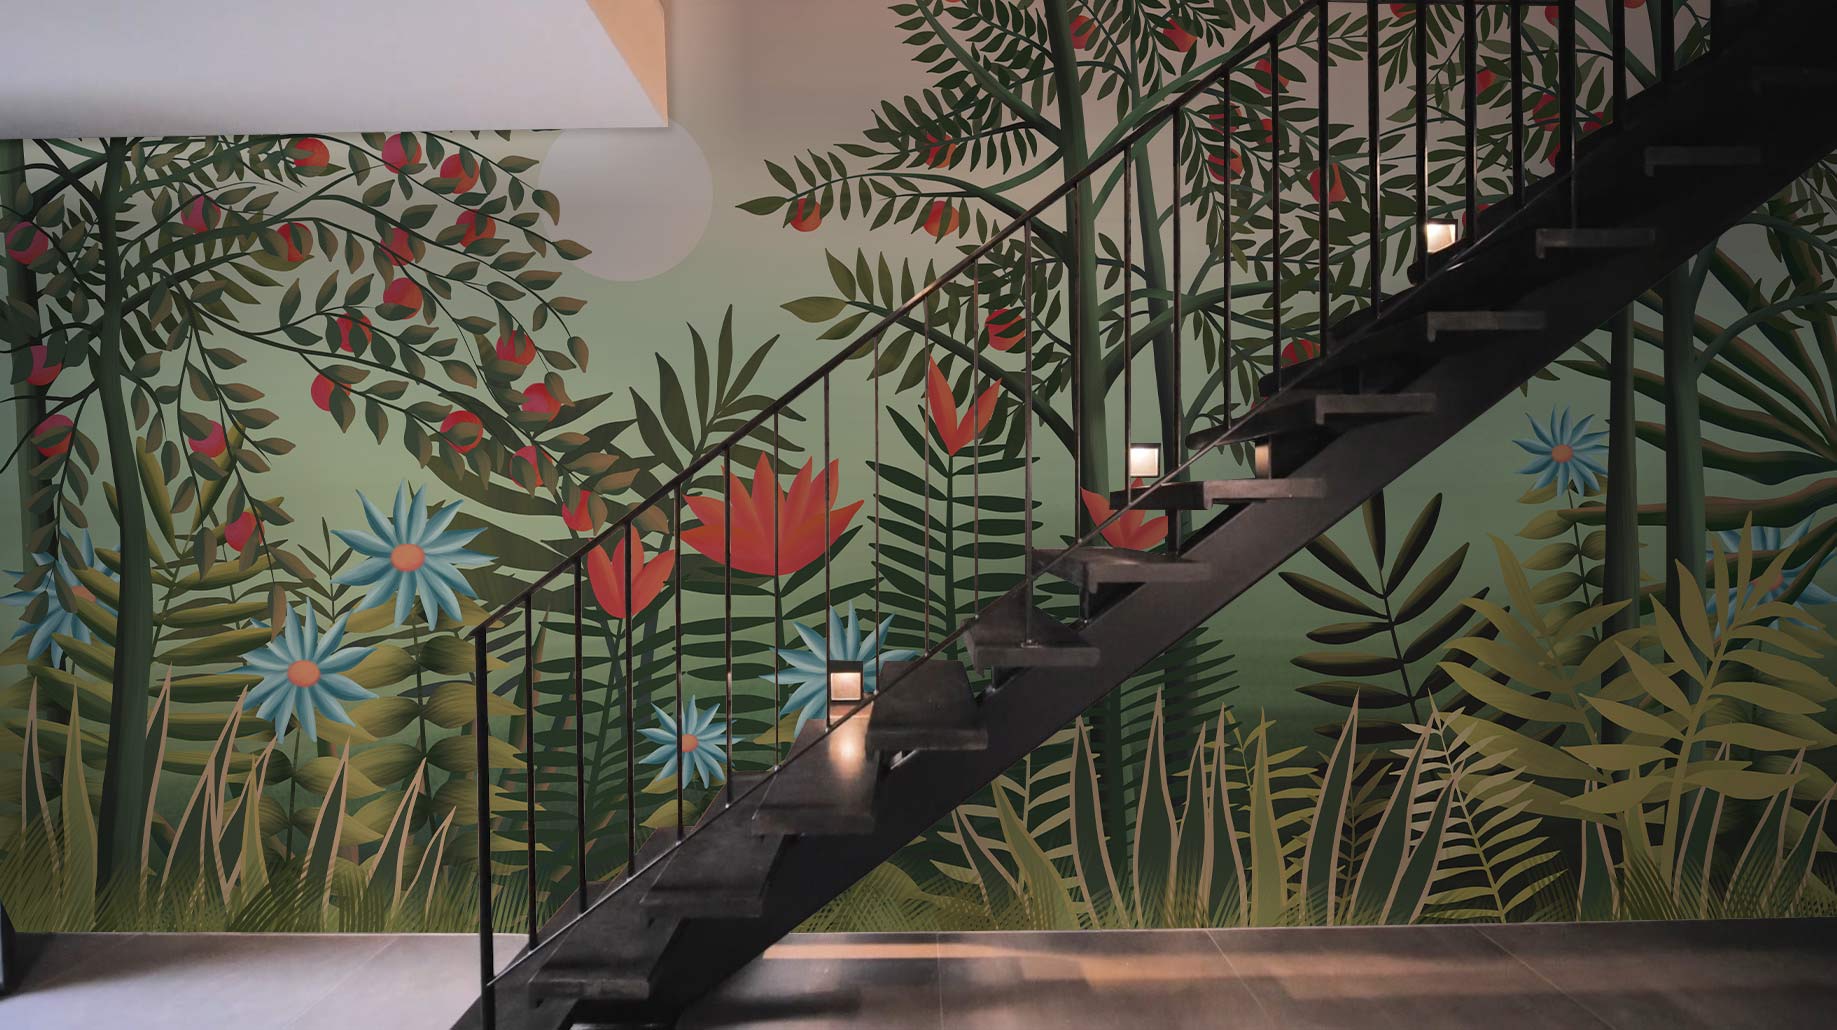 Hallway adornment with a jungle fruit wallpaper mural.